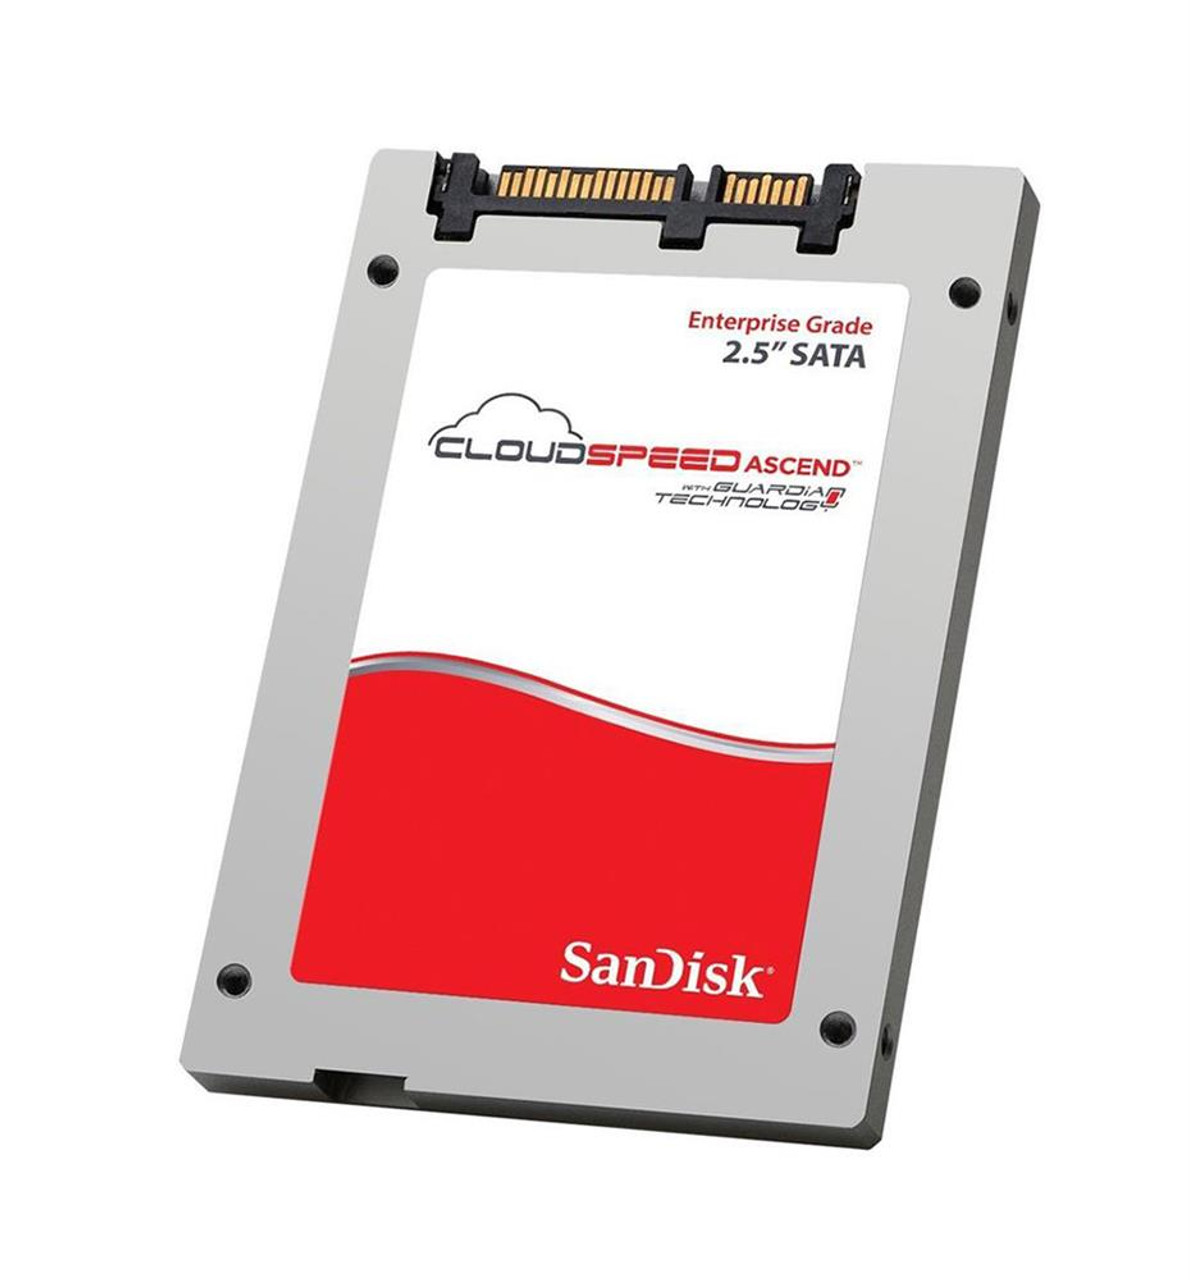 SDLFOD7R-480G-1H03 SanDisk CloudSpeed Ascend 480GB MLC SATA 6Gbps 2.5-inch Internal Solid State Drive (SSD)